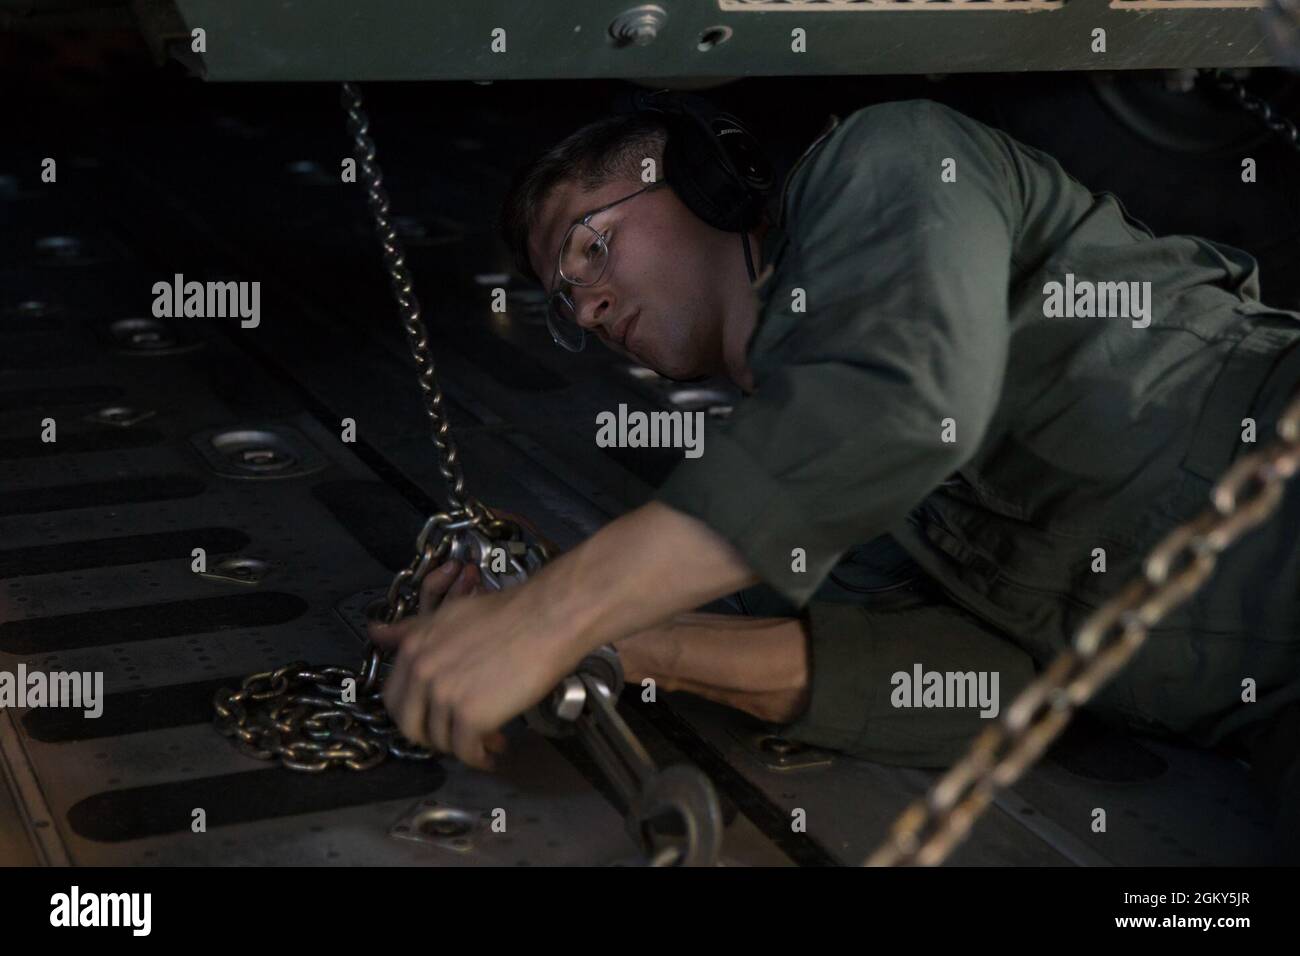 U.S. Marine Corps Sgt. Matthew Beyersdorf, a loadmaster with Marine Aerial Refueler Transport Squadron (VMGR) 152, chains down a High Mobility Artillery Rocket System vehicle in a KC-130J Super Hercules with VMGR-152 in support of Exercise Talisman Sabre 21 from Whitsunday Coast Airport, Queensland, Australia, July 25, 2021. Australian and U.S. Forces combine biannually for Talisman Sabre, a month-long multi-domain exercise that strengthens allied and partner capabilities to respond to the full range of Indo-Pacific security concerns. Stock Photo